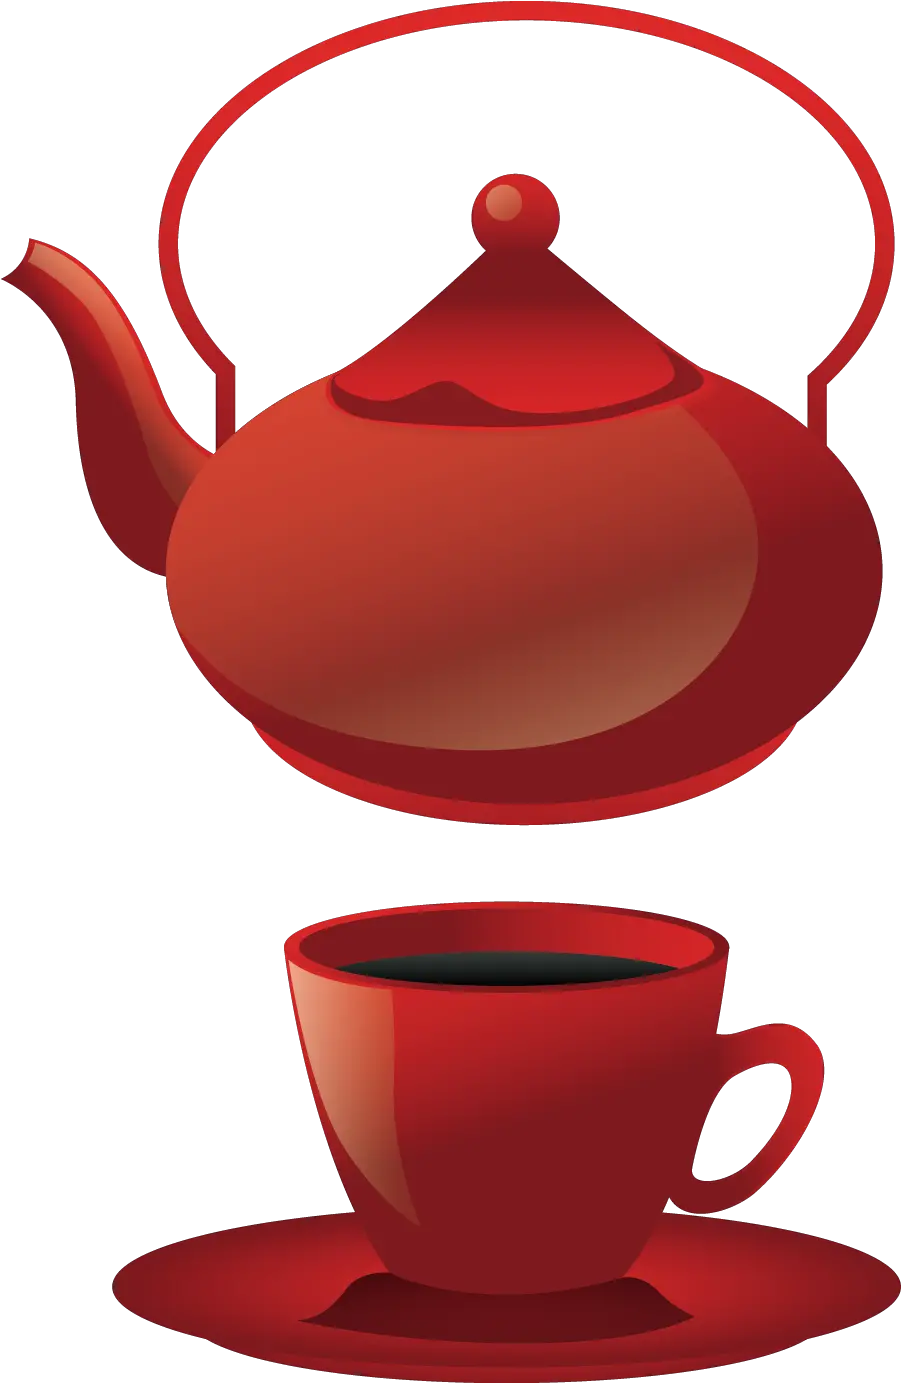 Teapot Coffee Cup Teacup Vector Painted Red Tea Cup Png Vector Teapot And Cup Tea Cup Png